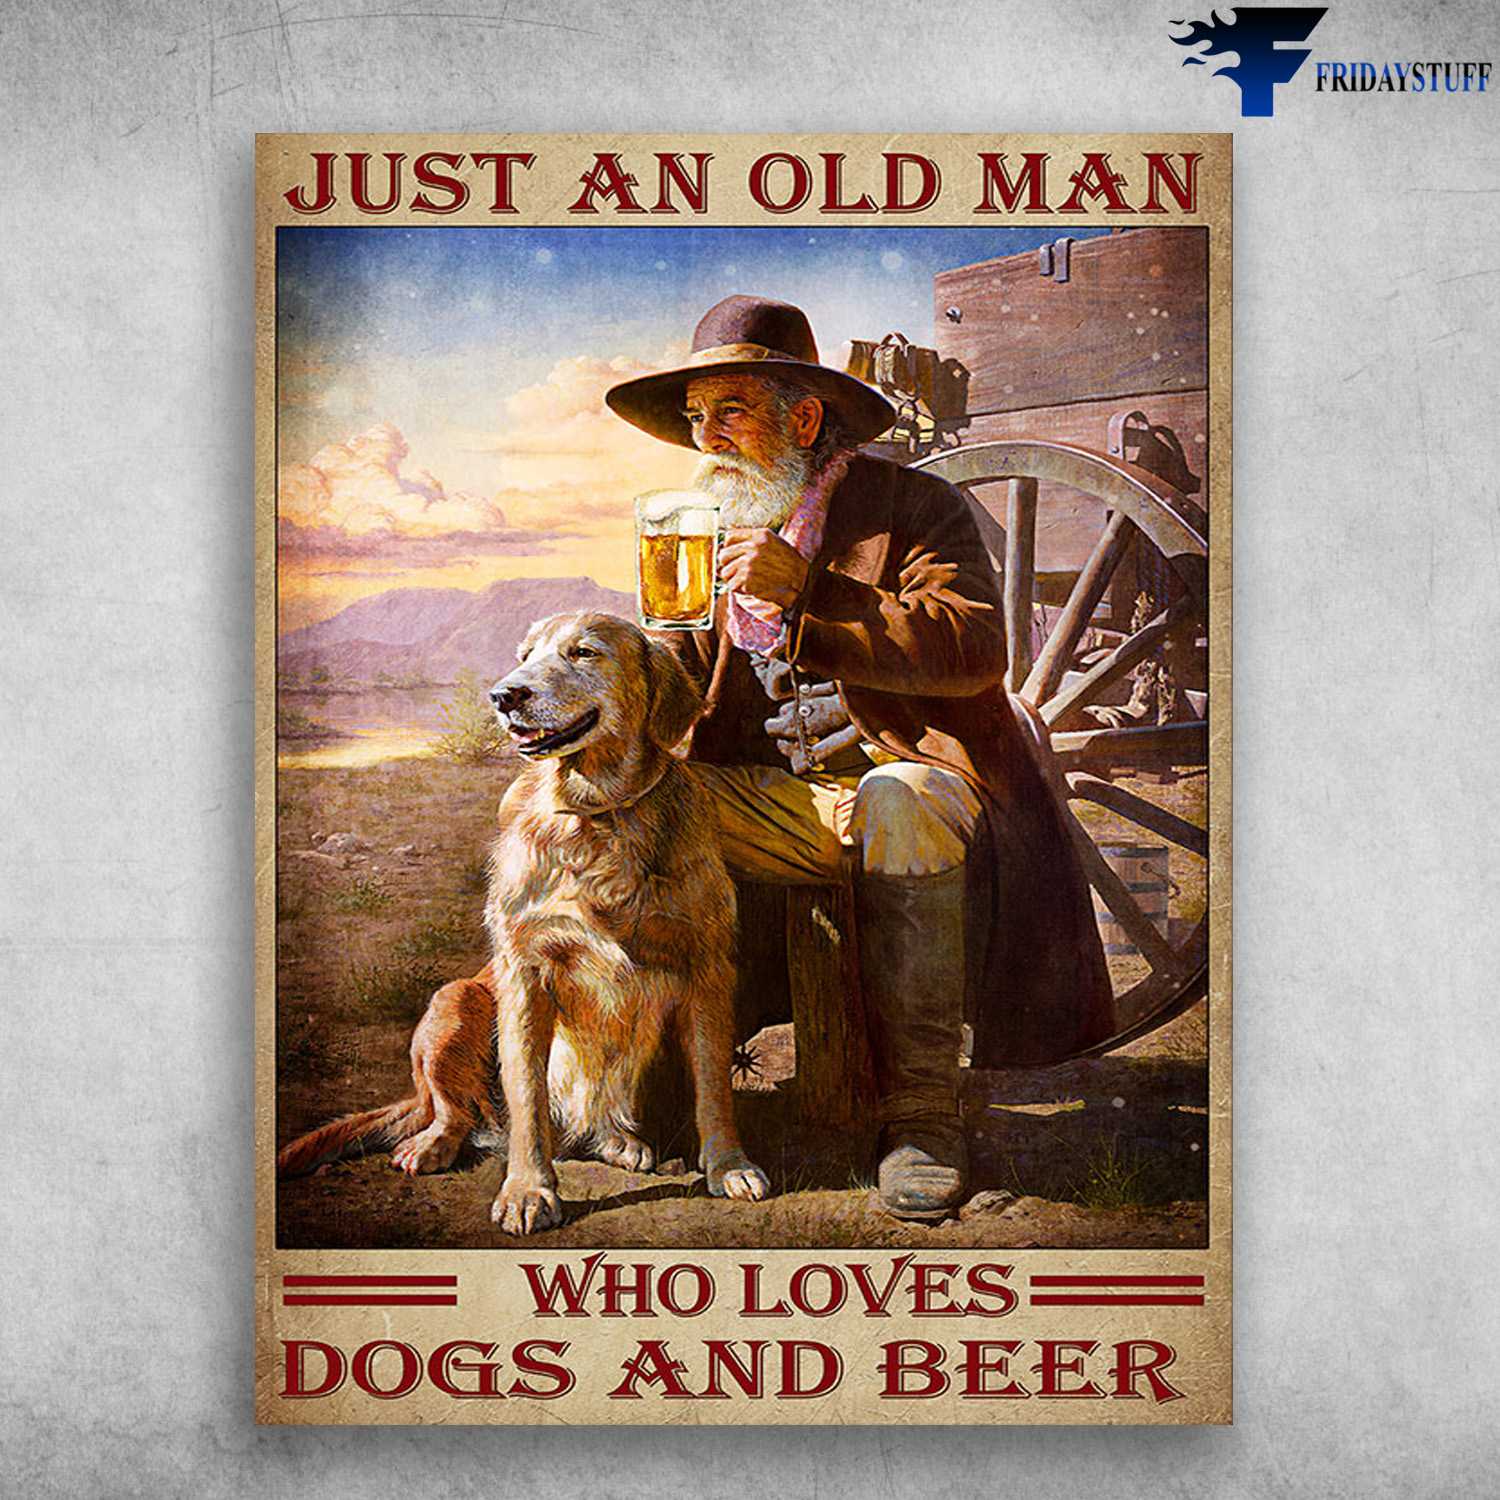 Dog Lover, Old Man Drinks Beer - Just An Old Man, Who Loves Dogs And Beer